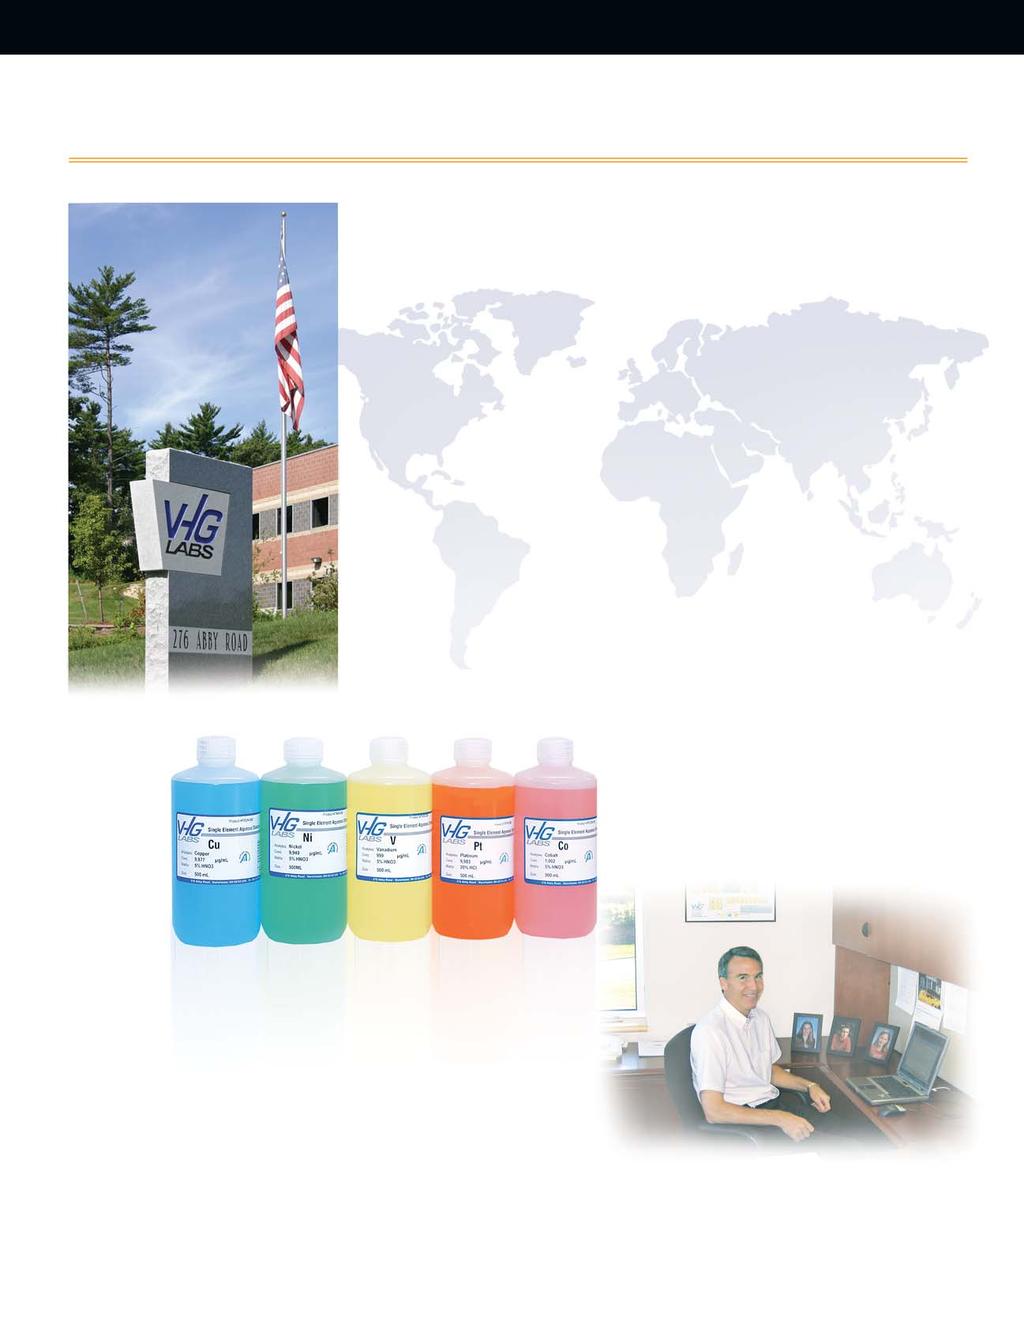 Committed To Our Customers Our Mission Statement: VHG Labs provides superior value to our customers worldwide with high quality analytical chemistry products and services.